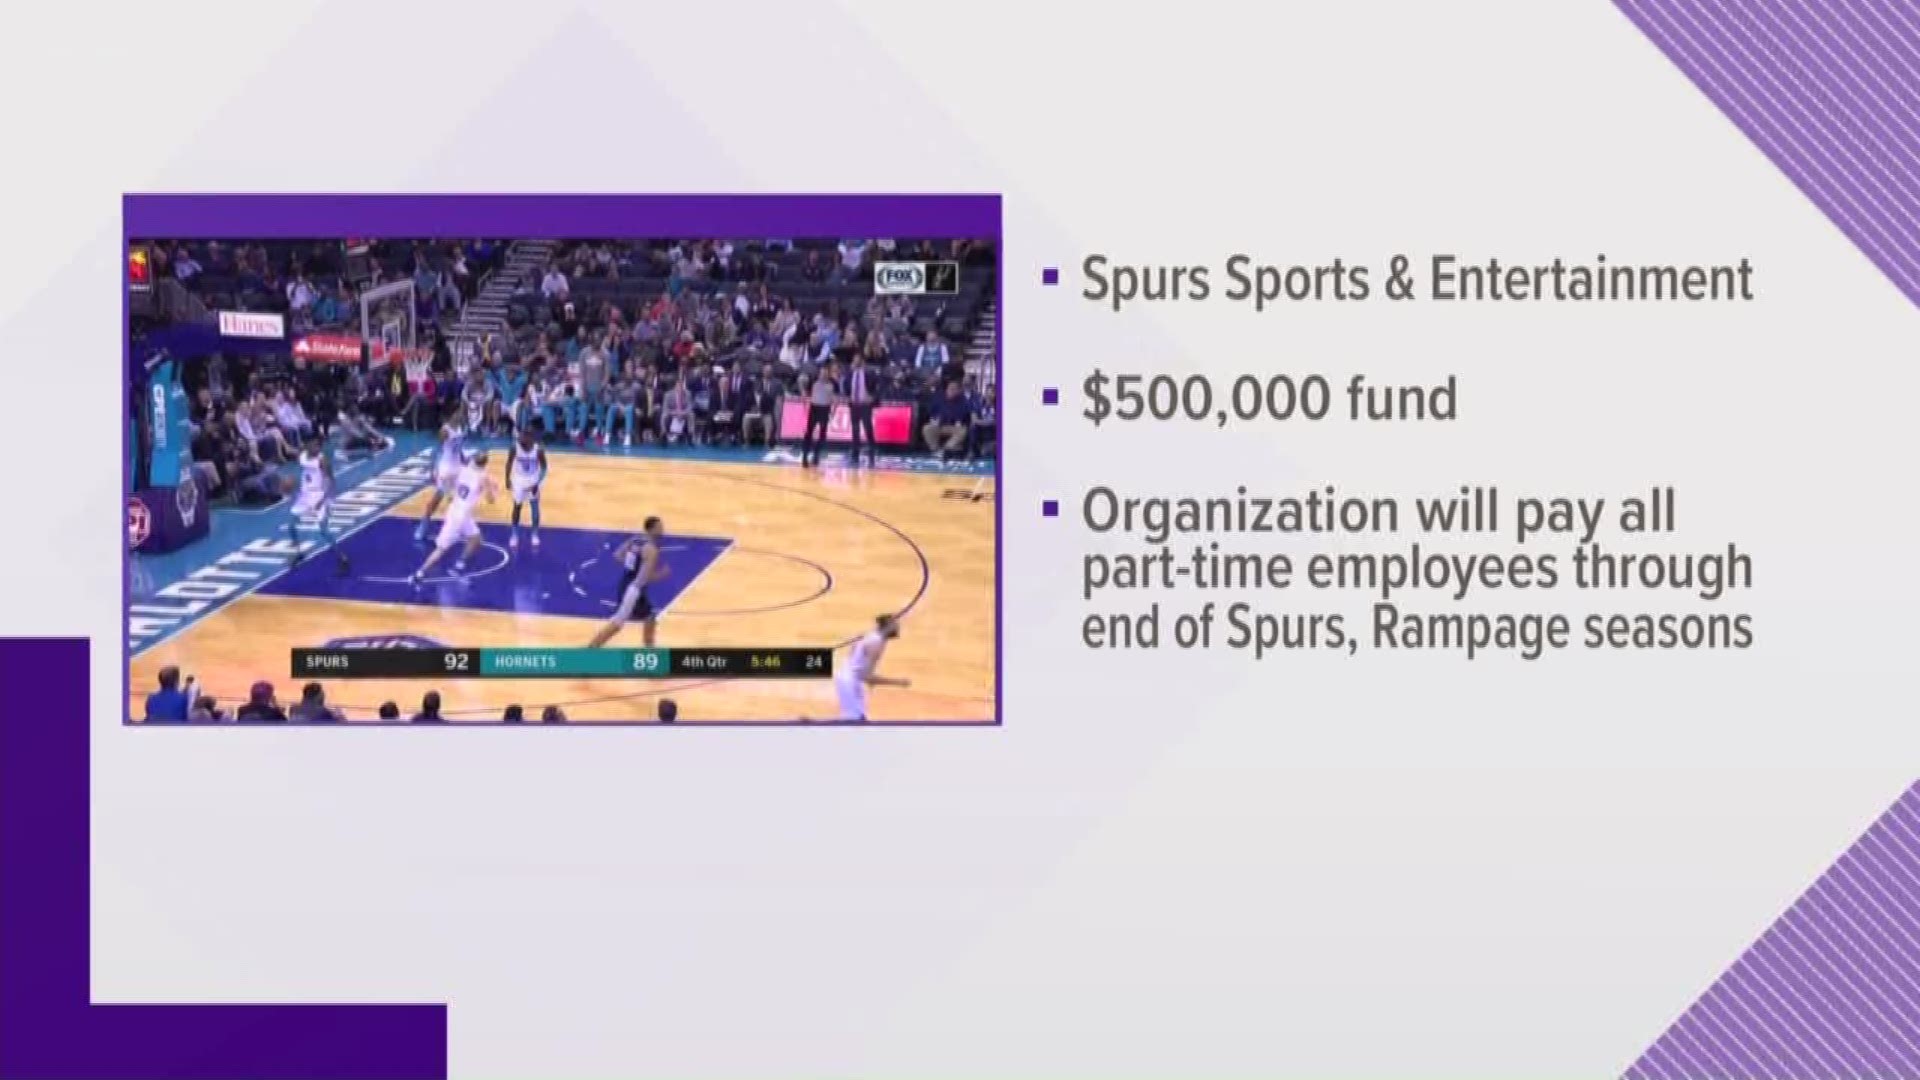 Spurs Sports & Entertainment is creating a fund to help their part-time employees while they're out of work due to the coronavirus.